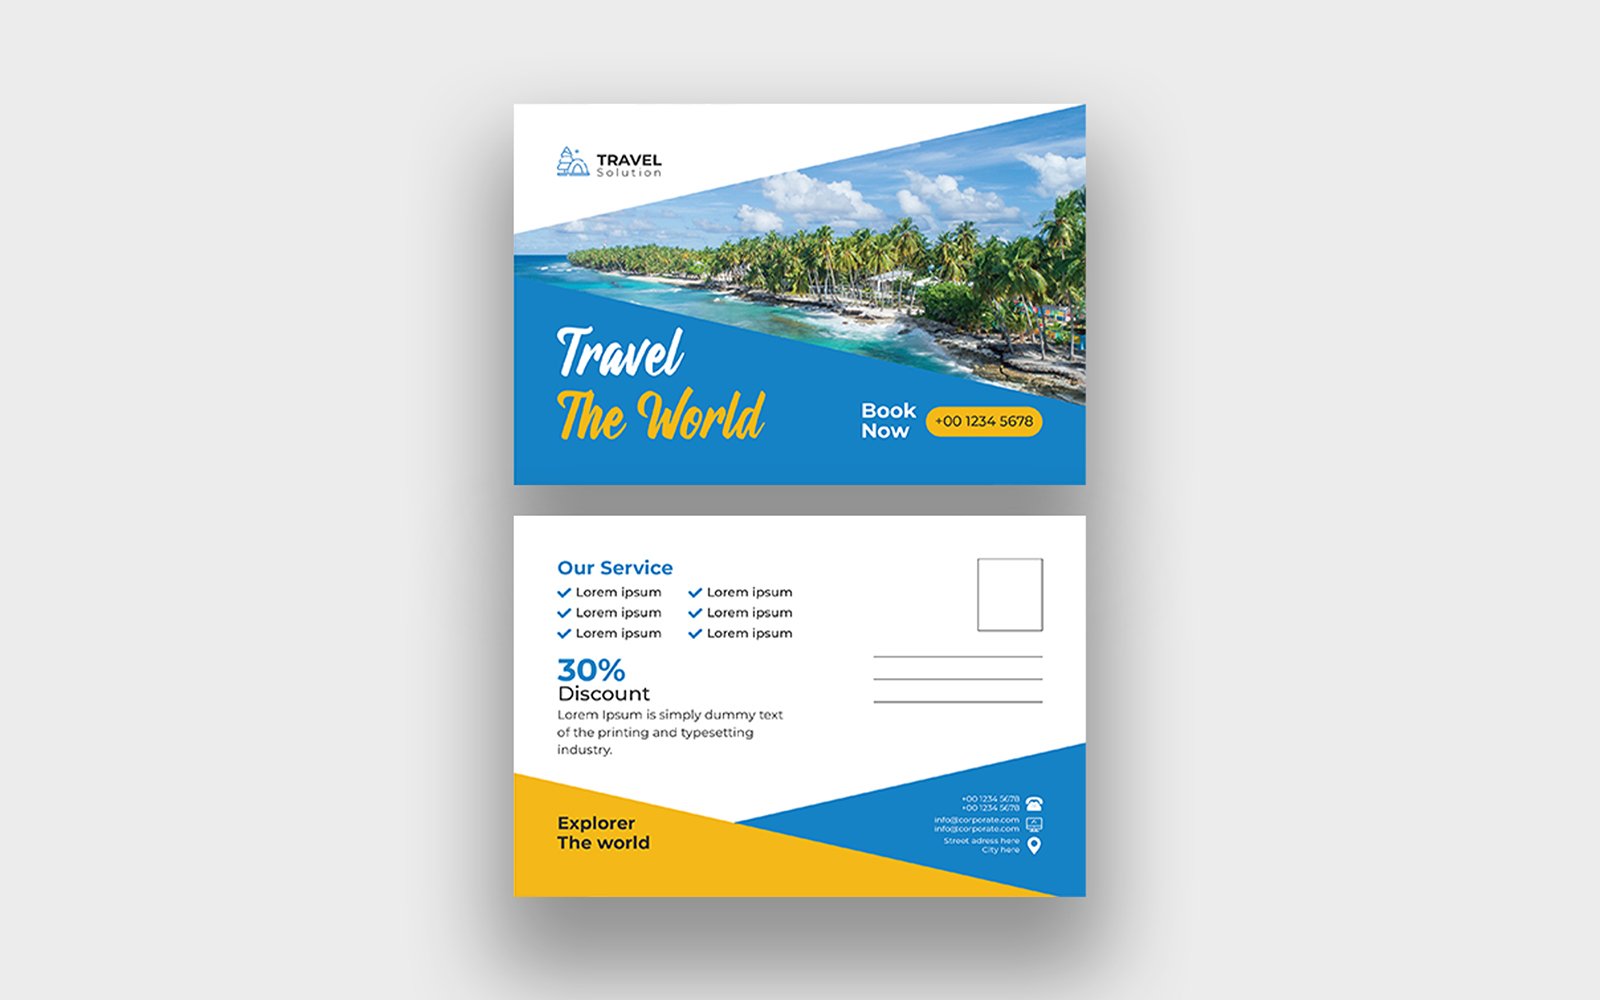 Template #298349 Travel Travel Webdesign Template - Logo template Preview